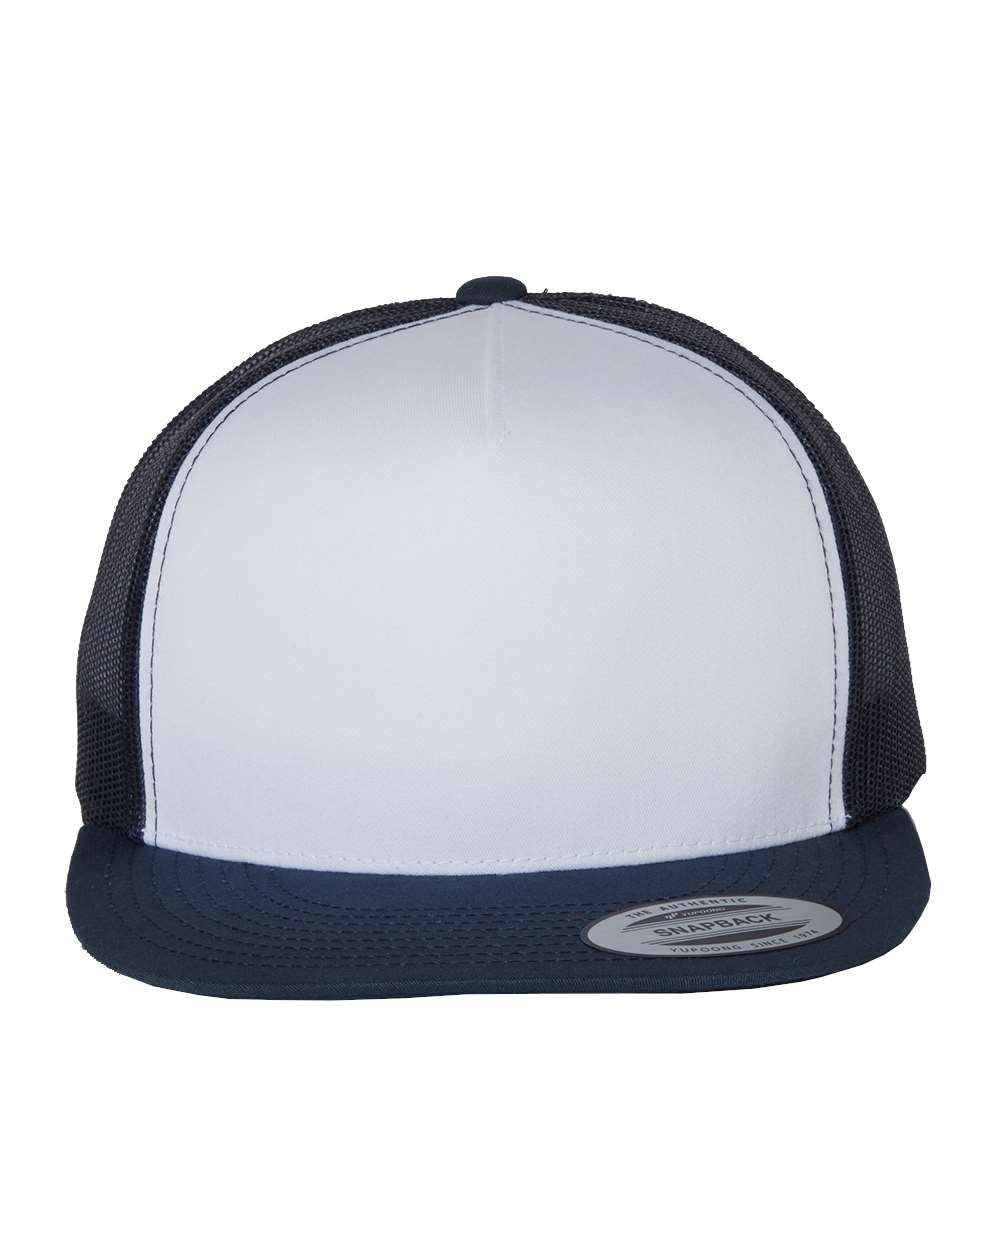 Navy/White/Navy color variant